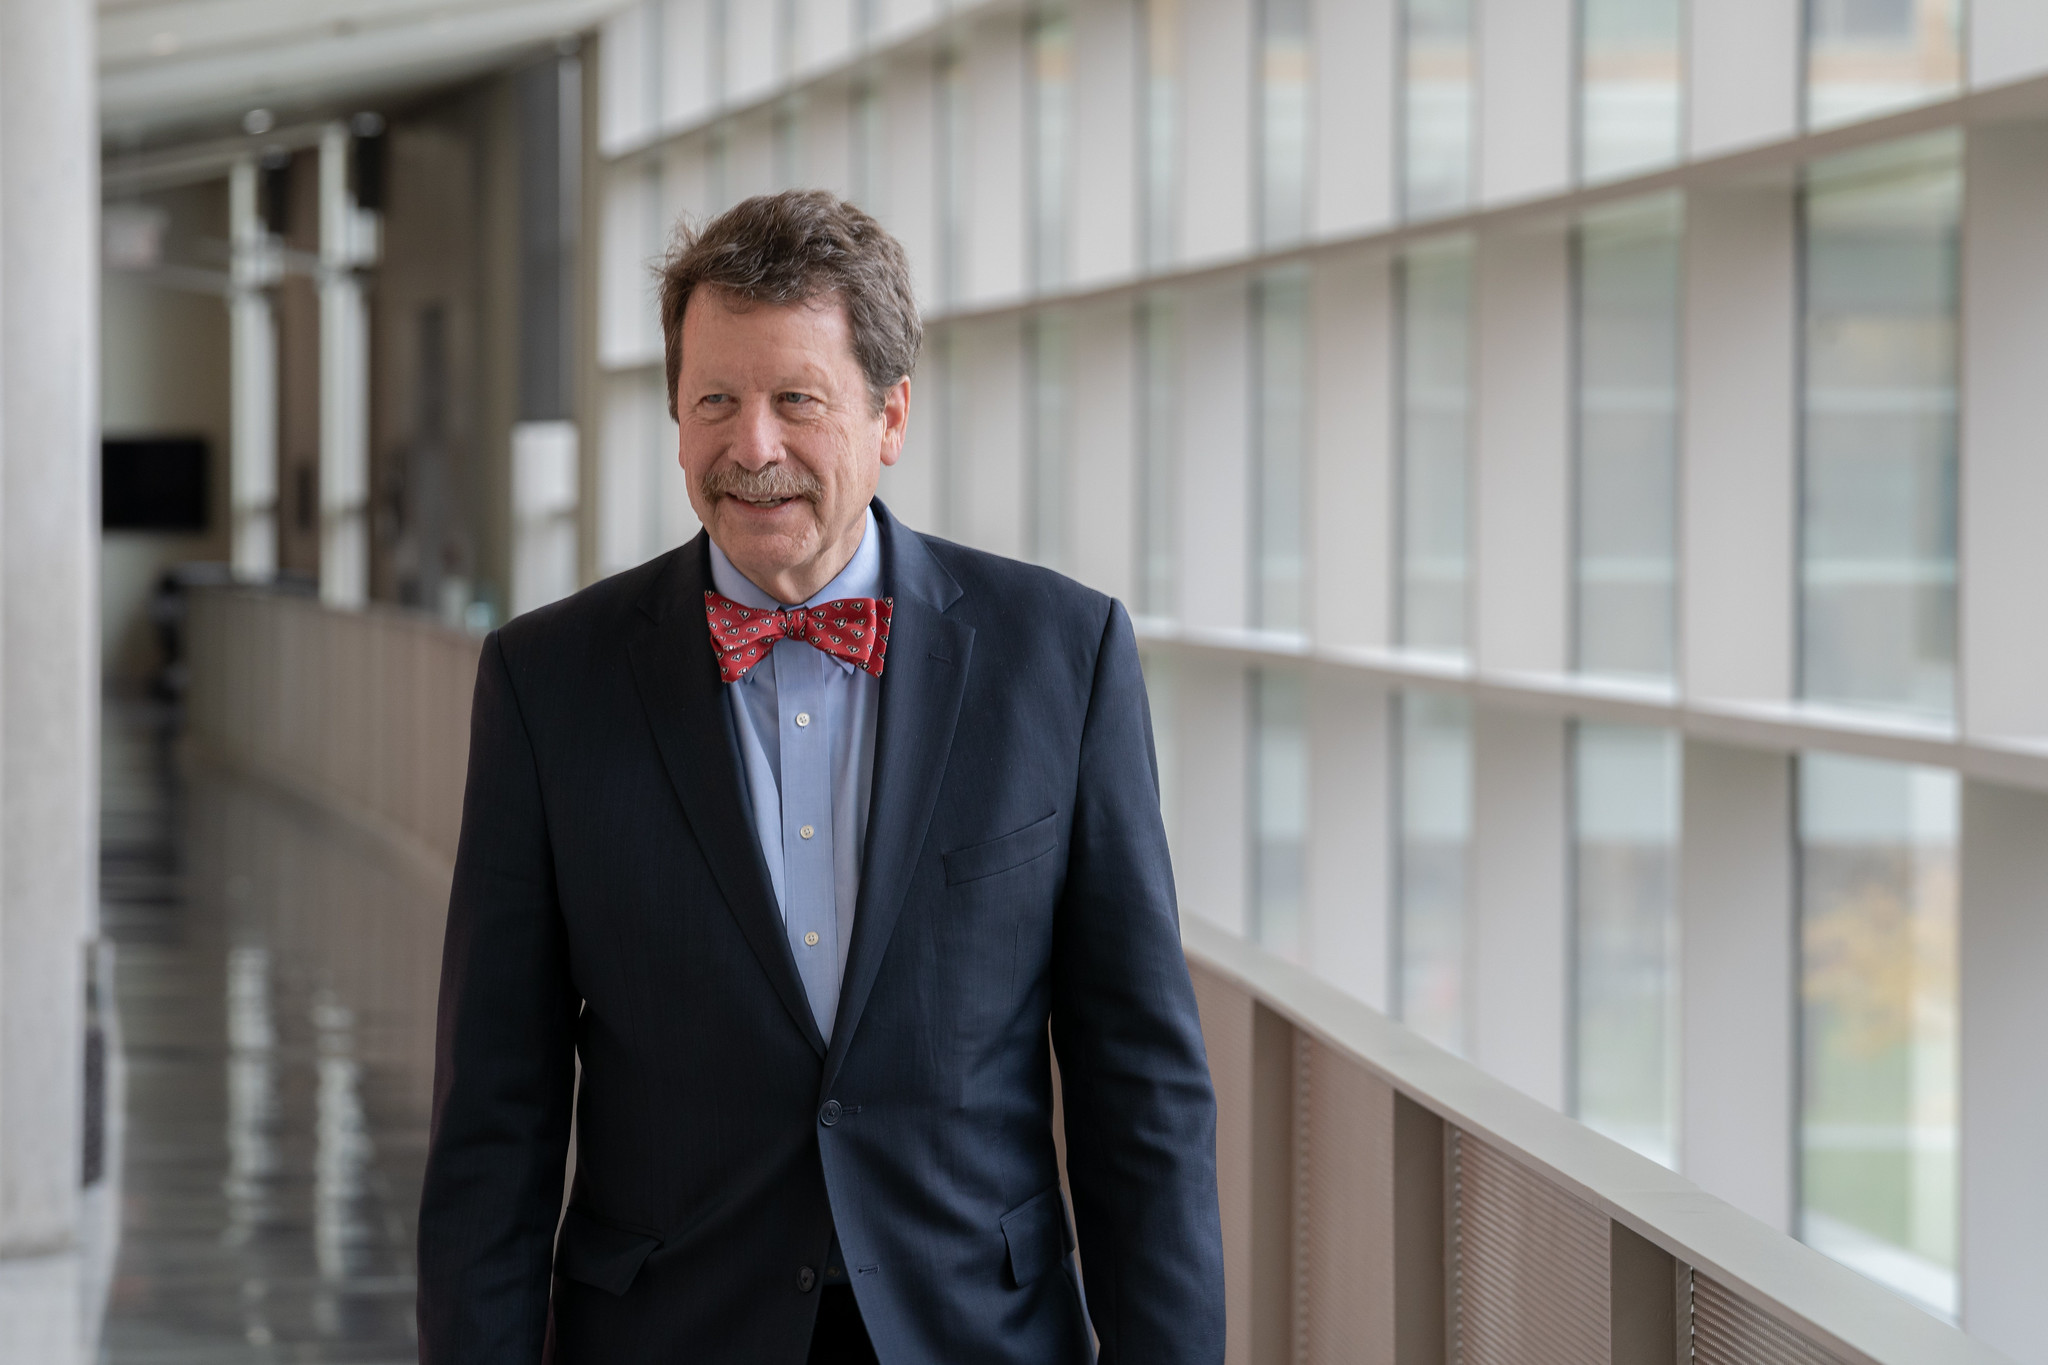 FDA Commissioner Robert Califf stands against a wall of windows at the agency. FDA photo.